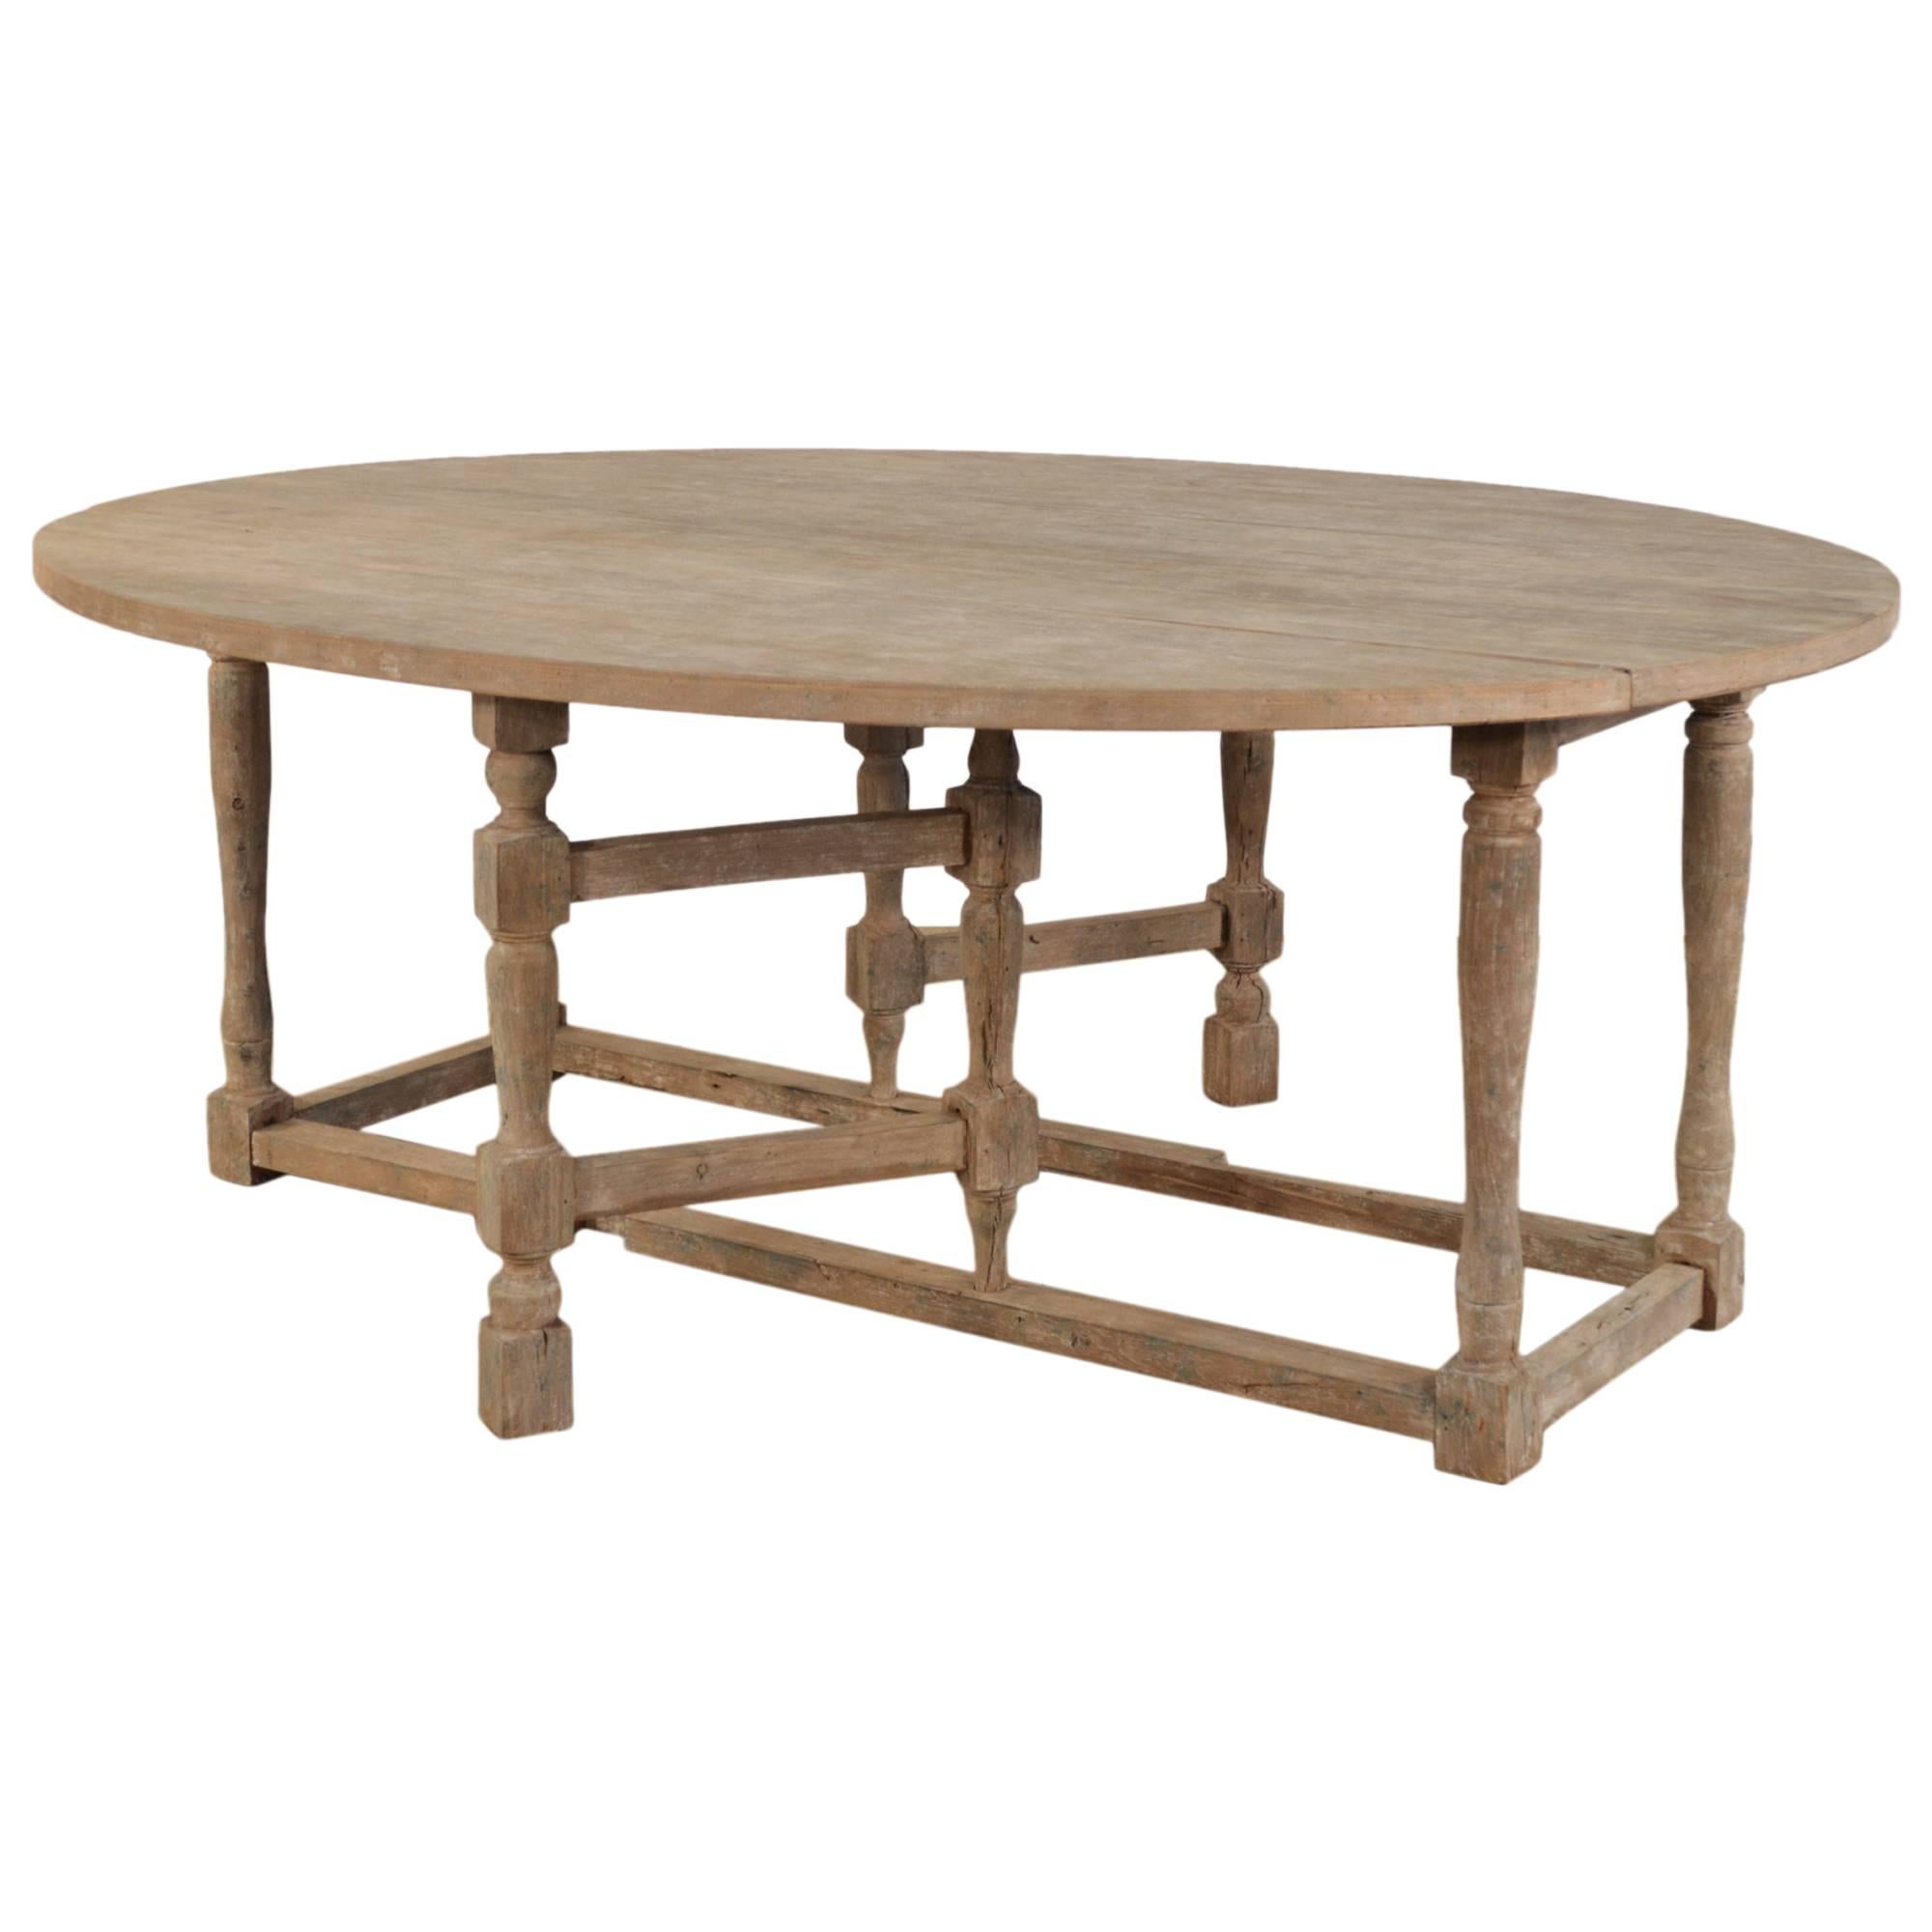 Wood Oval Dining Table For Sale